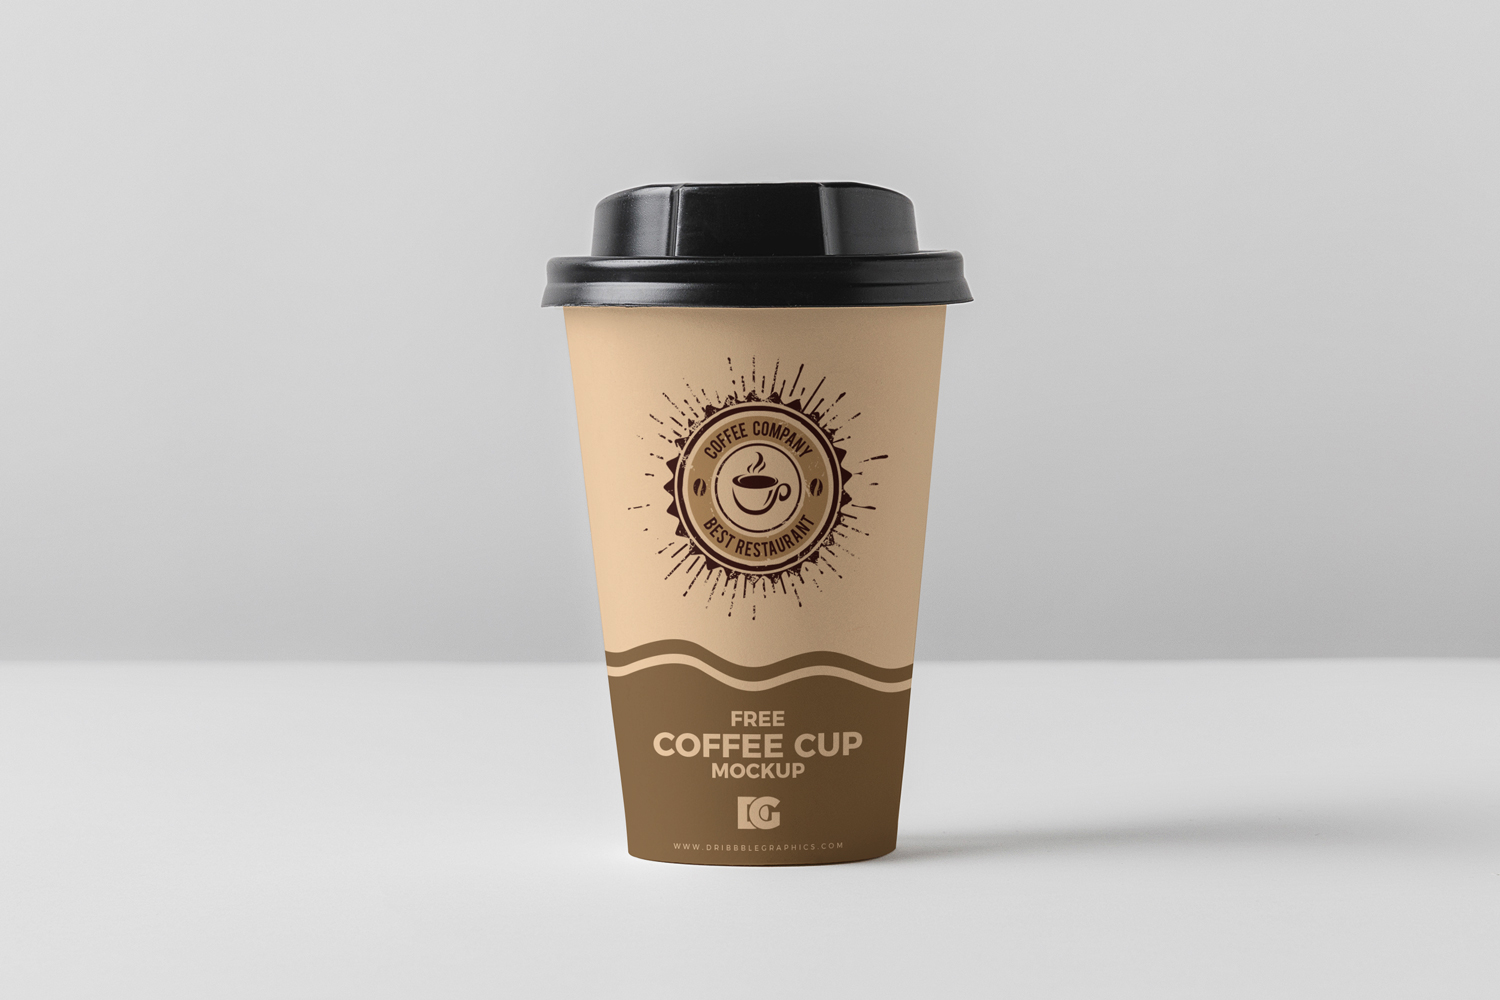 Free-Coffee-Cup-Mockup-PSD-For-Branding-2018